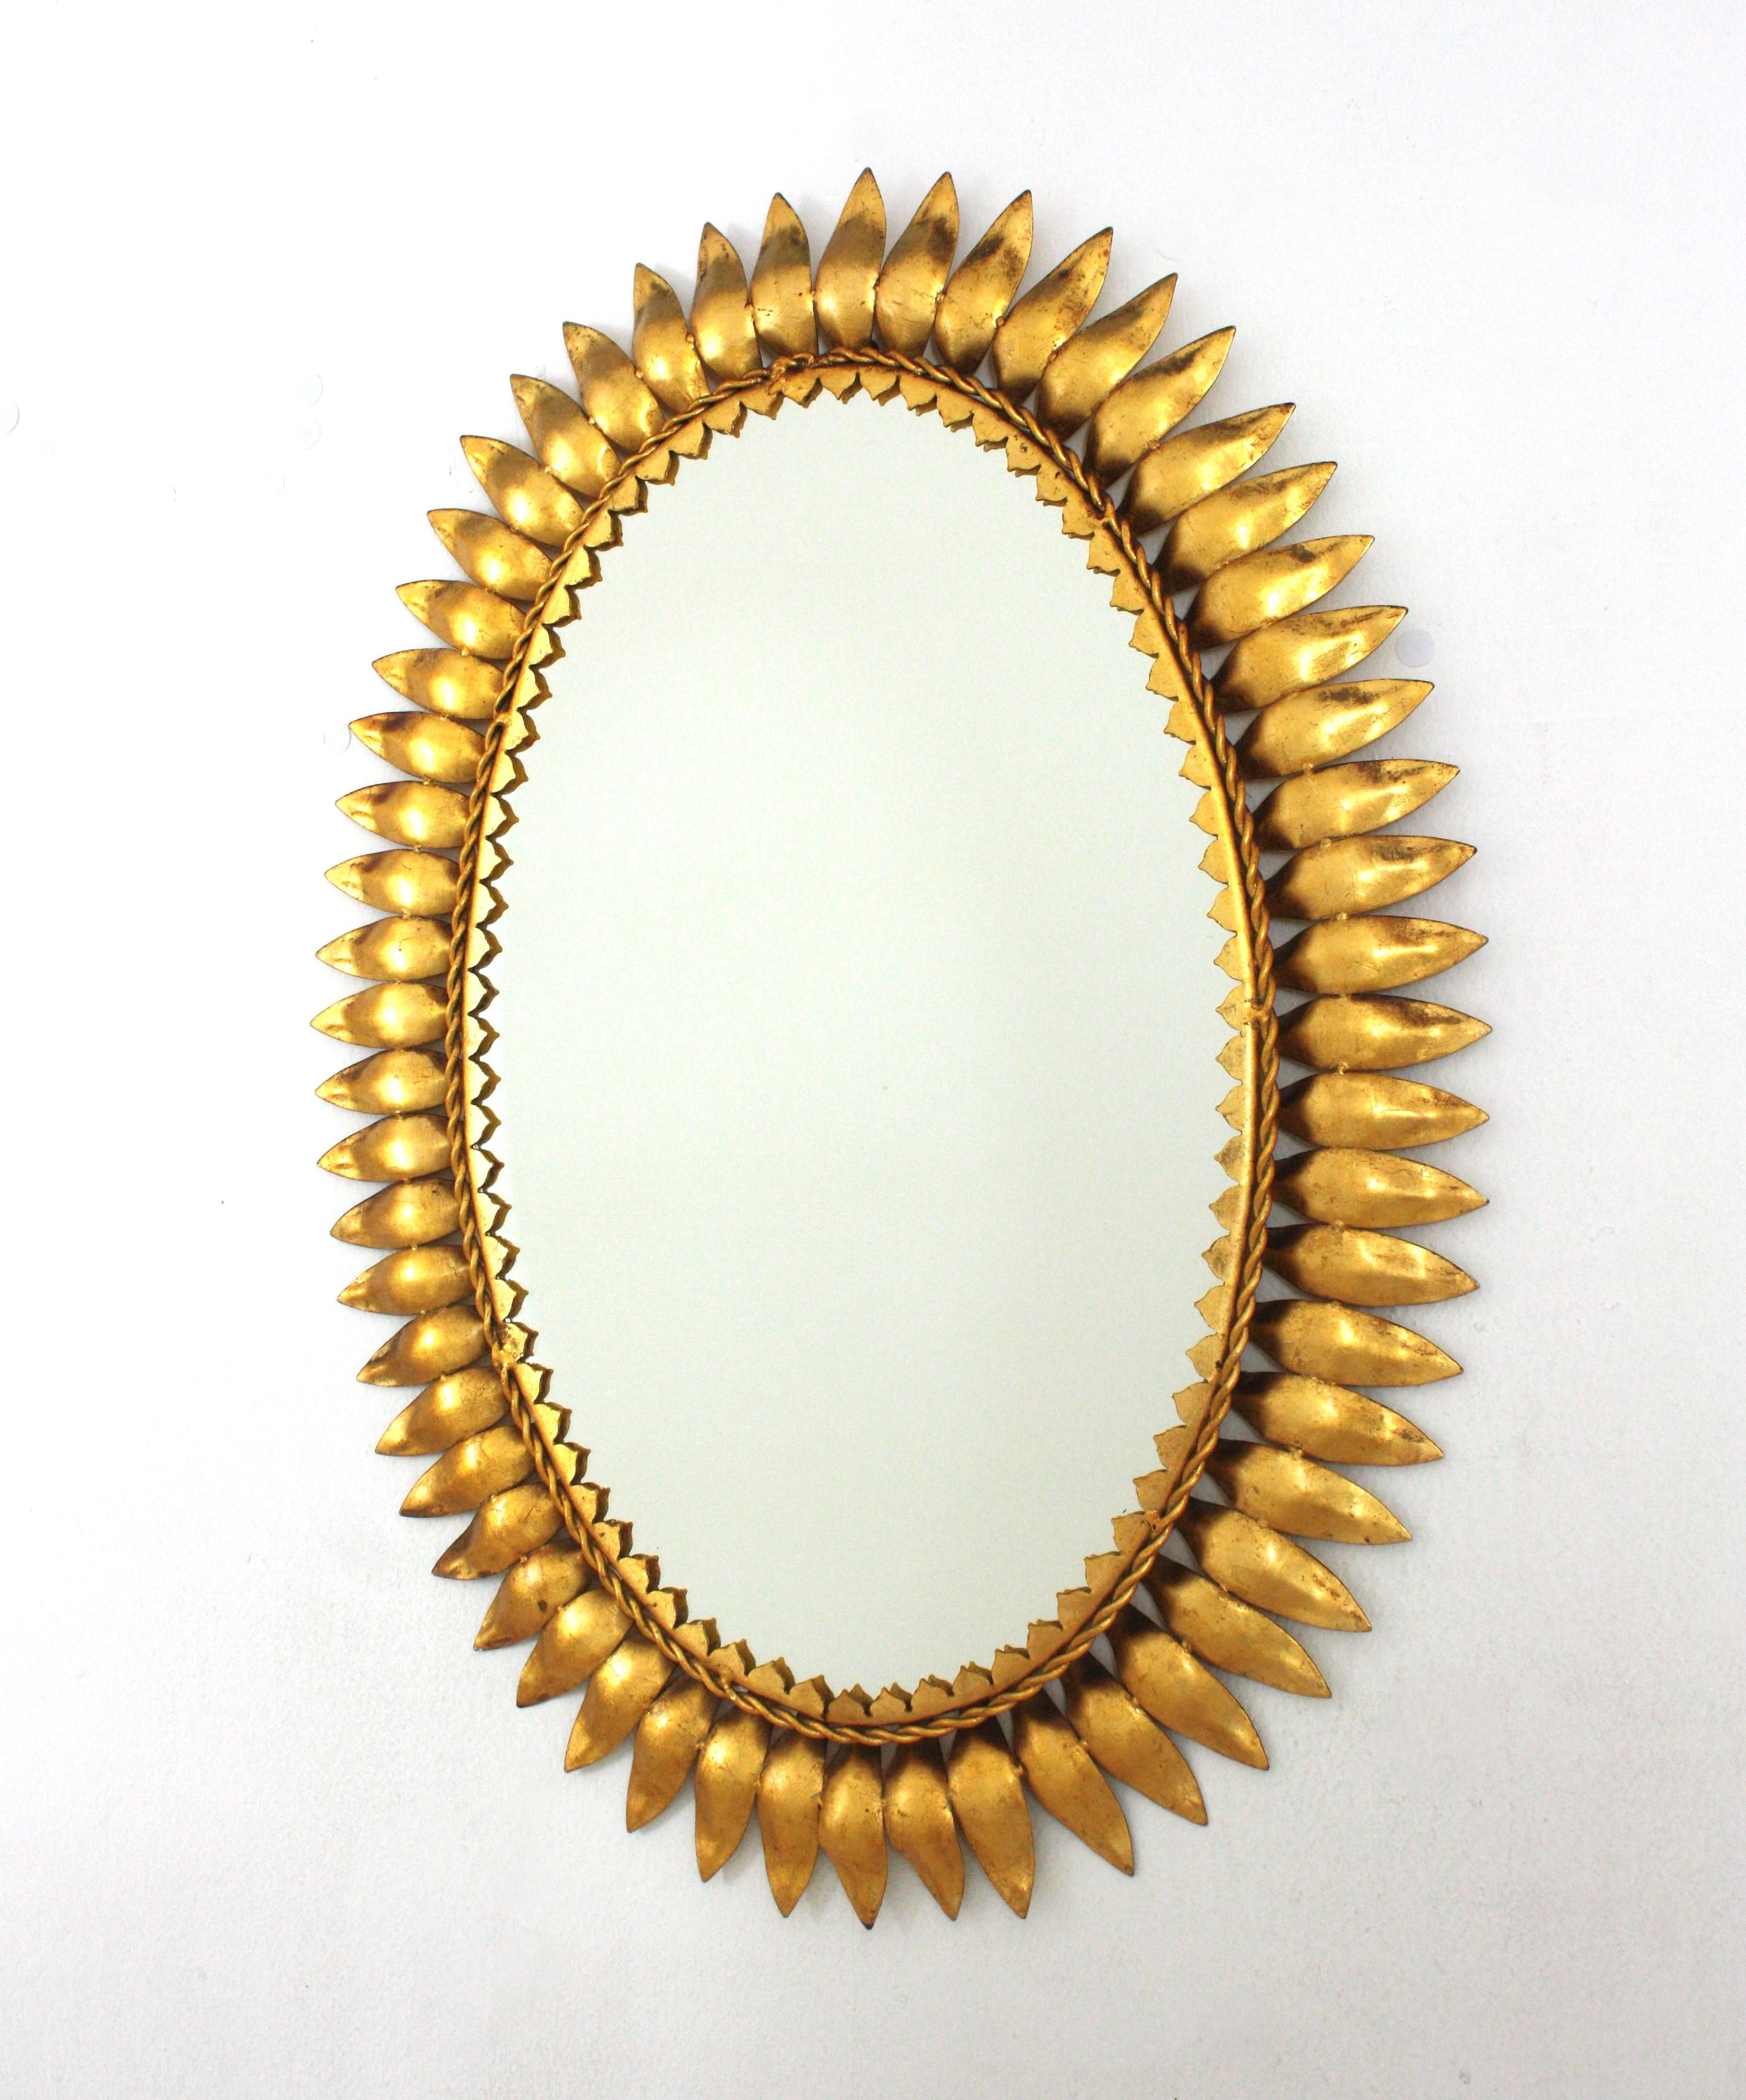 Gilt lron Sunburst Oval Wall Mirror
Mid-Century Modern iron sunburst oval wall mirror with leafed frame and gold leaf finish, Spain, 1950s.
This eye-catching sunburst mirror has a nice patina showing its original gold leaf gilding.
Placed over a